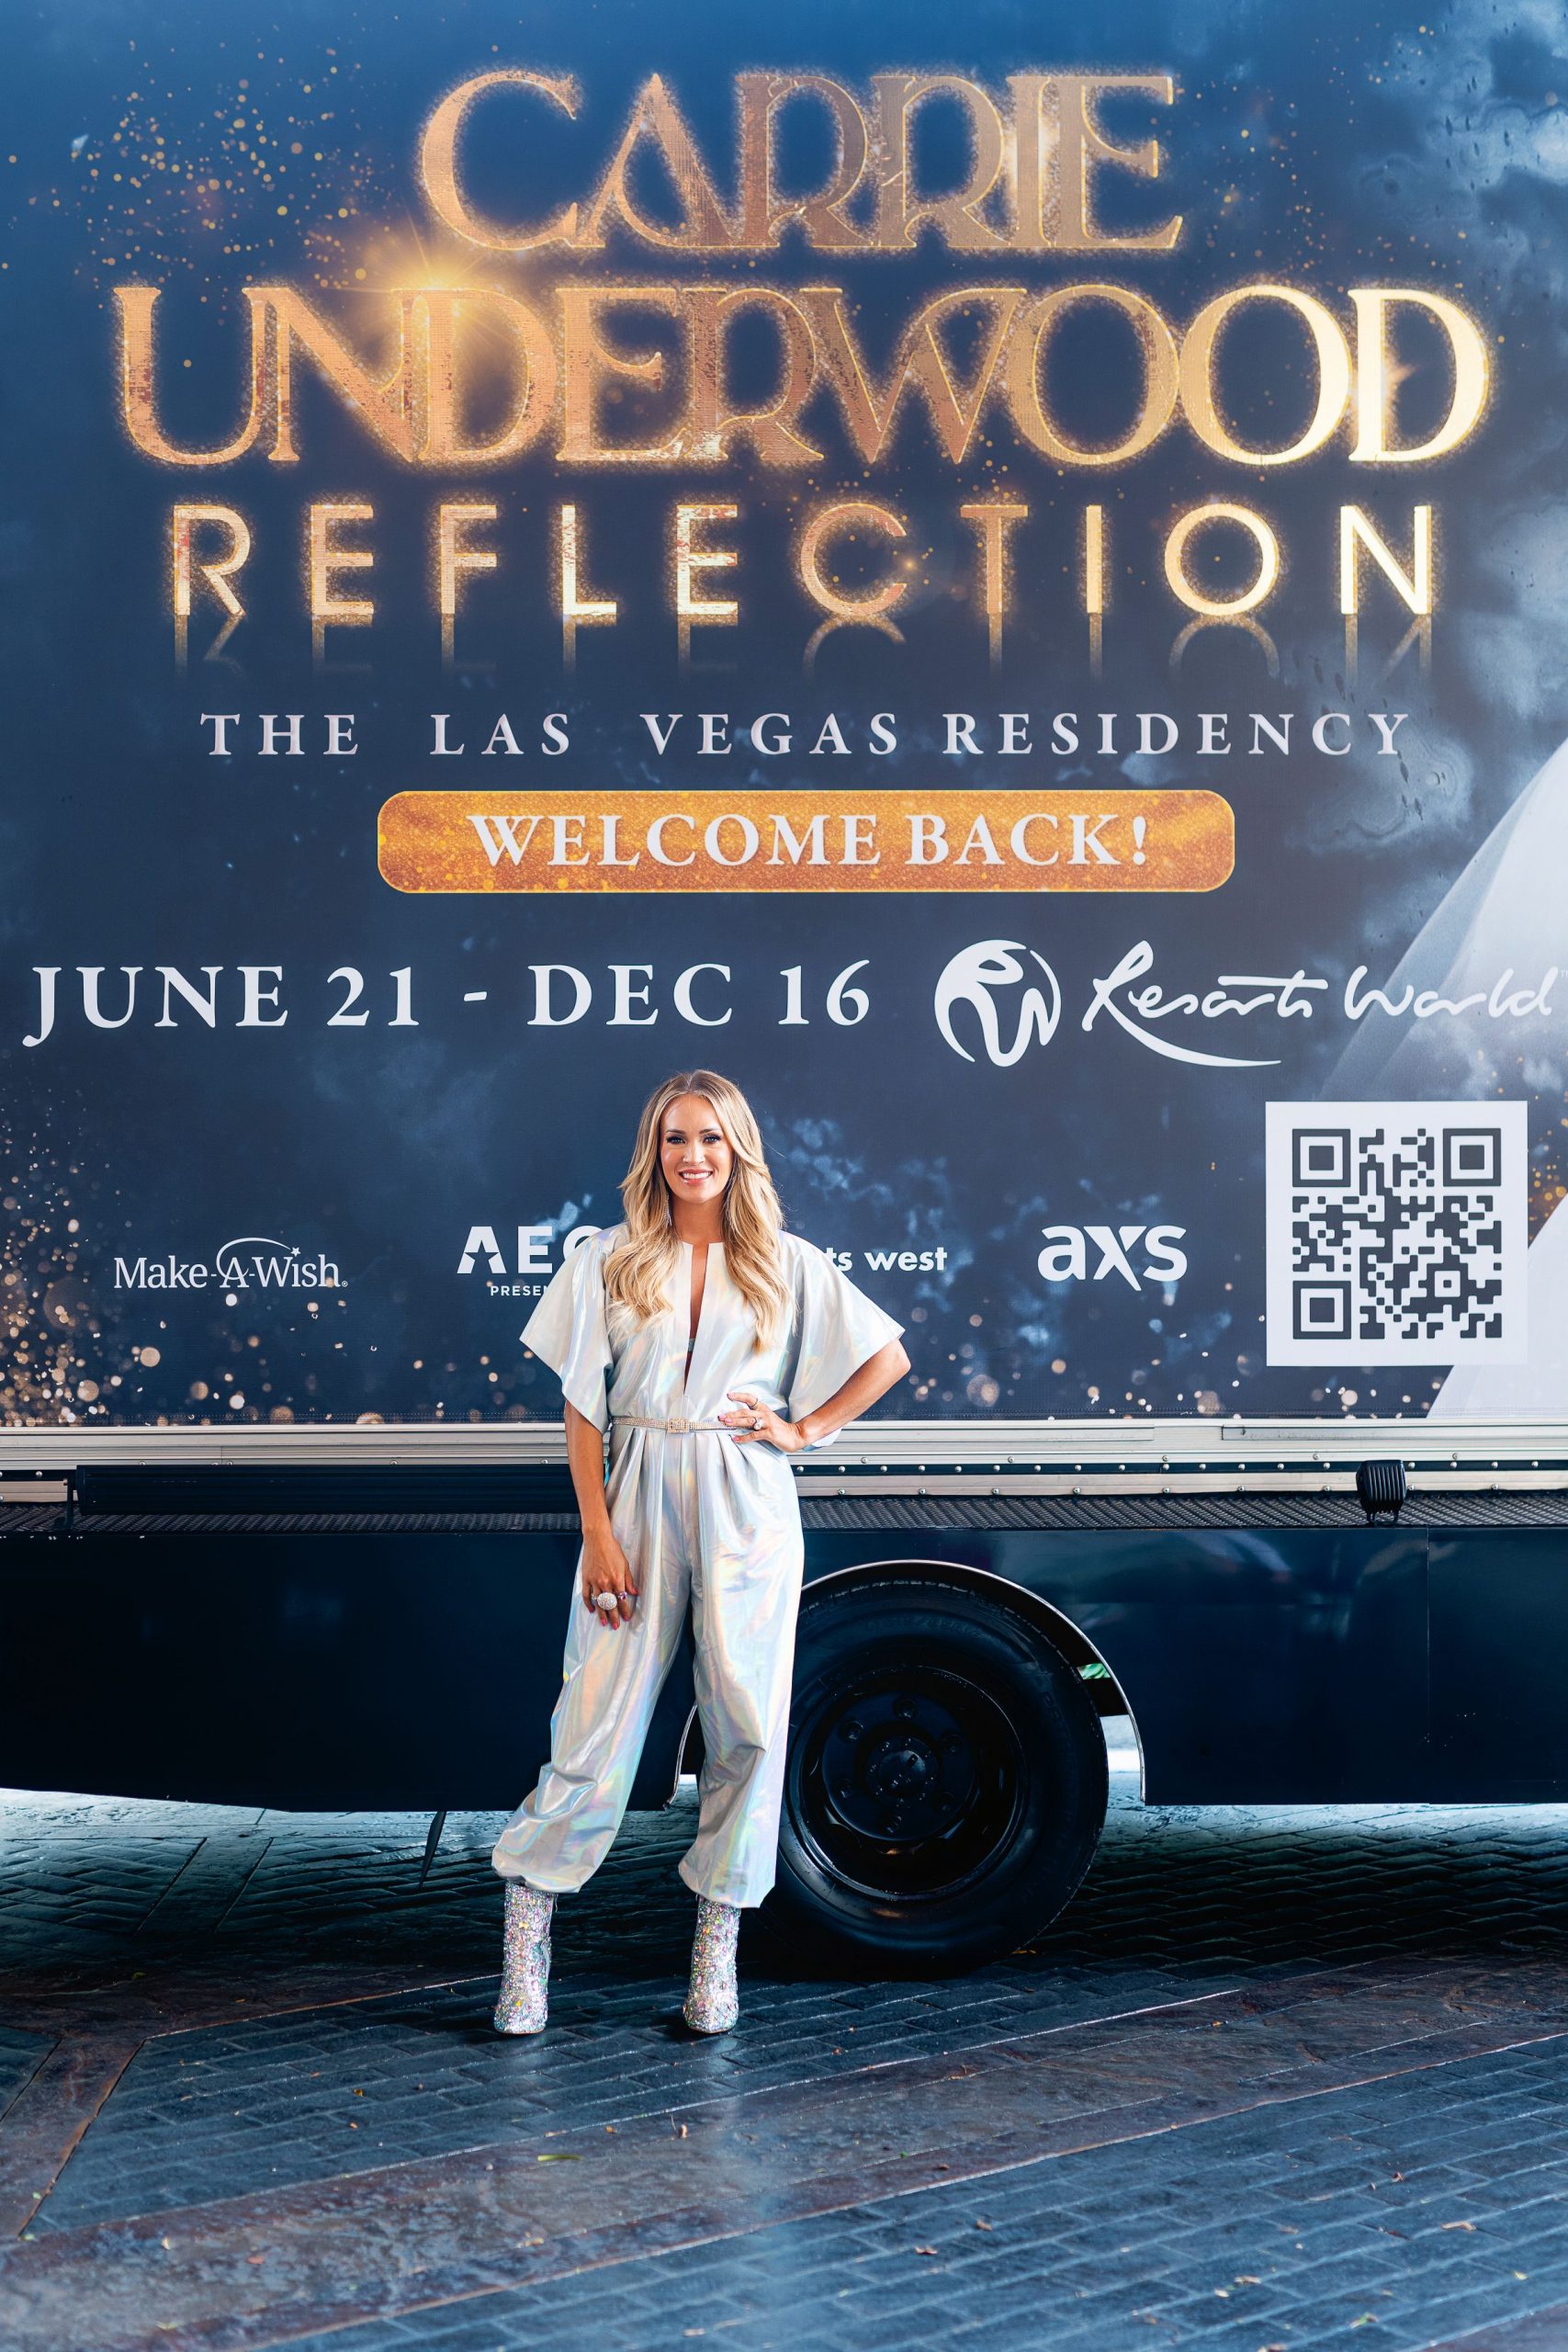 CARRIE UNDERWOOD RECEIVES GRAND WELCOME TO CELEBRATE HER JUNE 21 RETURN TO RESORTS WORLD LAS VEGAS FOR REFLECTION: THE LAS VEGAS RESIDENCY AT RESORTS WORLD THEATRE